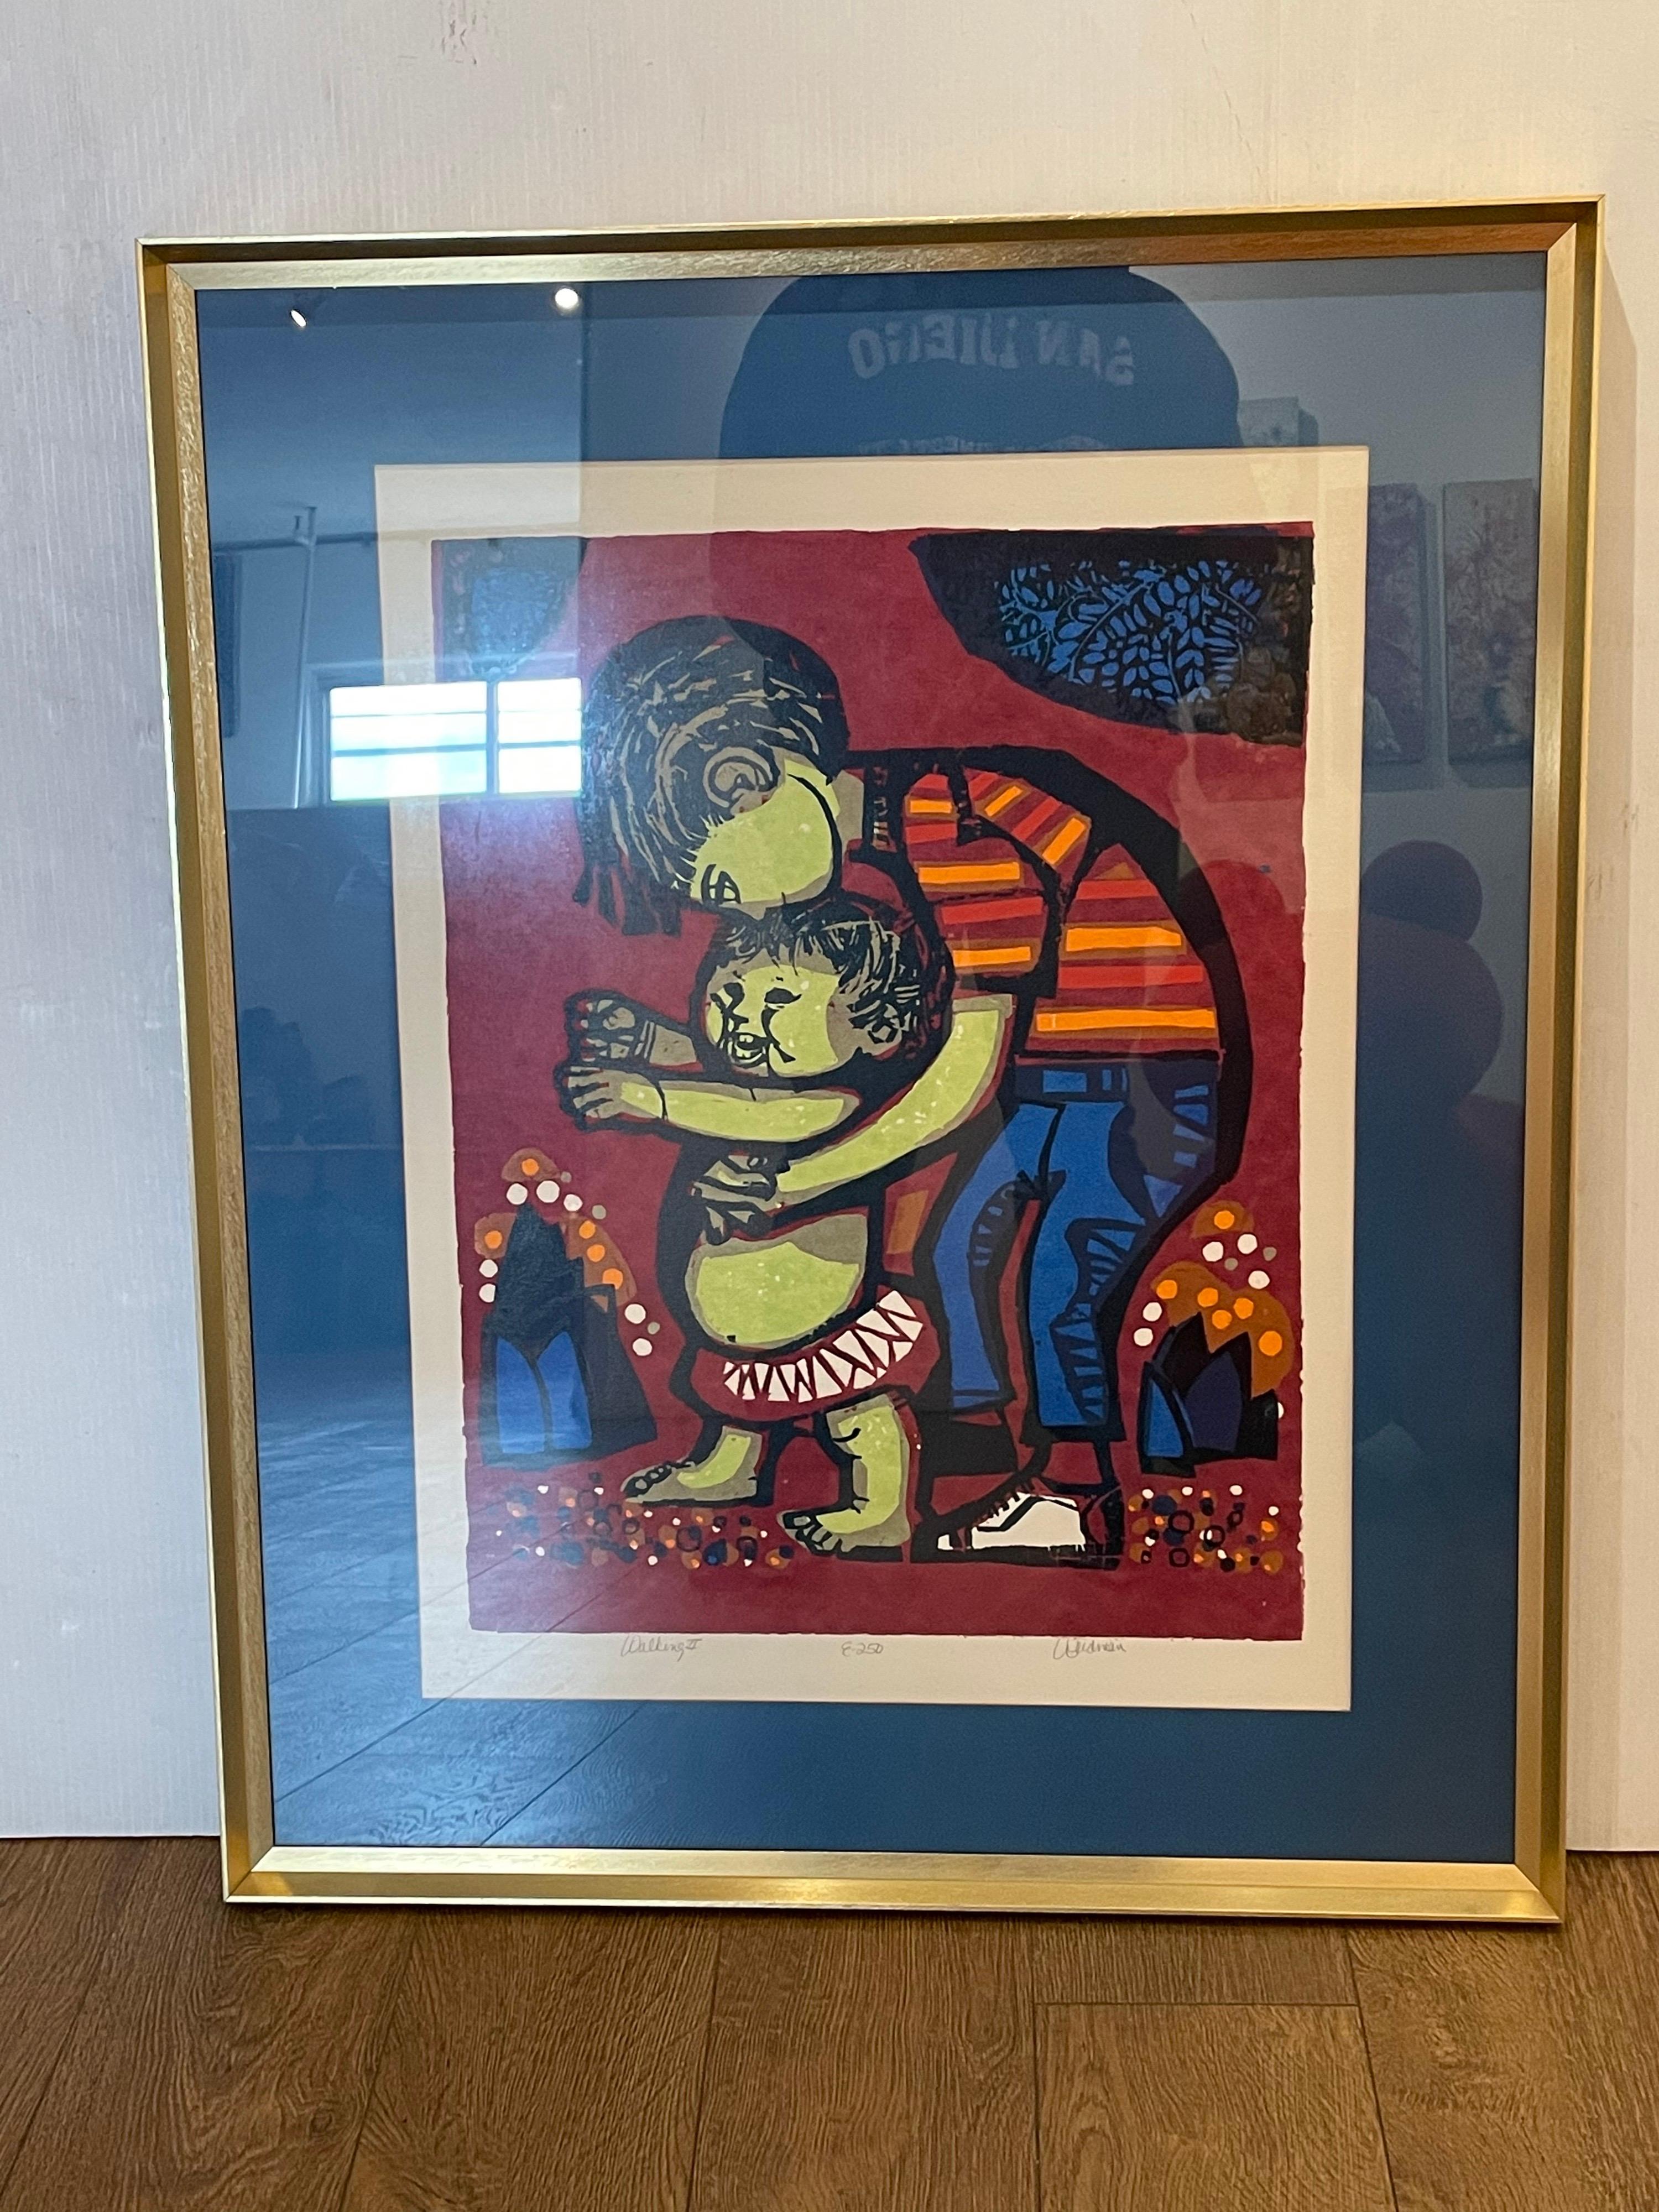 Beautiful original print by David Weidman ED of 250, signed and numbered David Weidman's (1921-2014) work is easily recognizable and emblematic of midcentury graphic design. This is an early work done, circa 1960s and has been recently framed, the